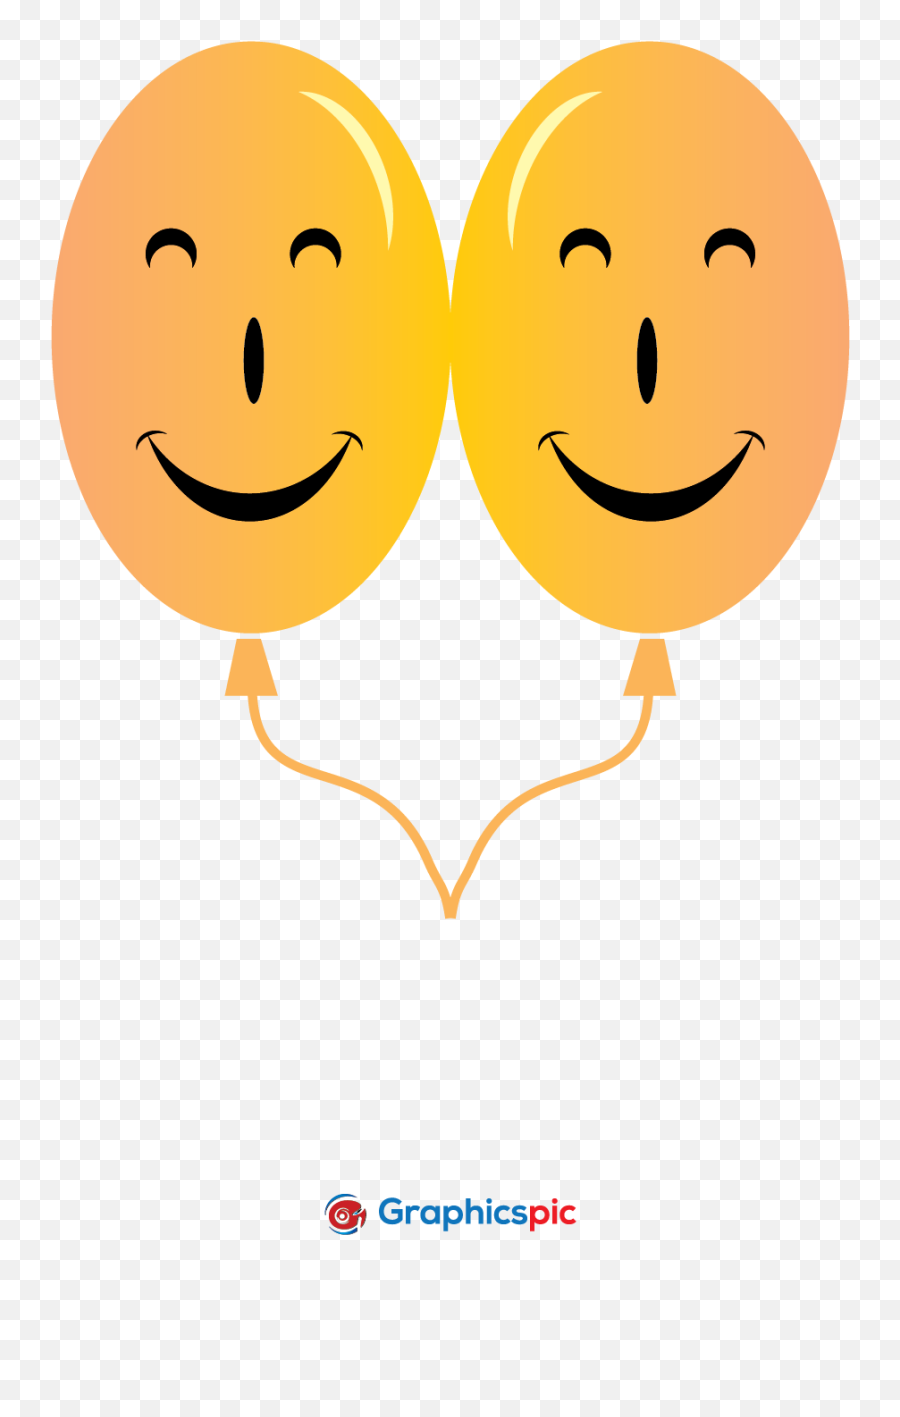 Background Of Smiling Balloons U2013 Free Vector - Graphics Pic Happy Emoji,Emoticon Balloons